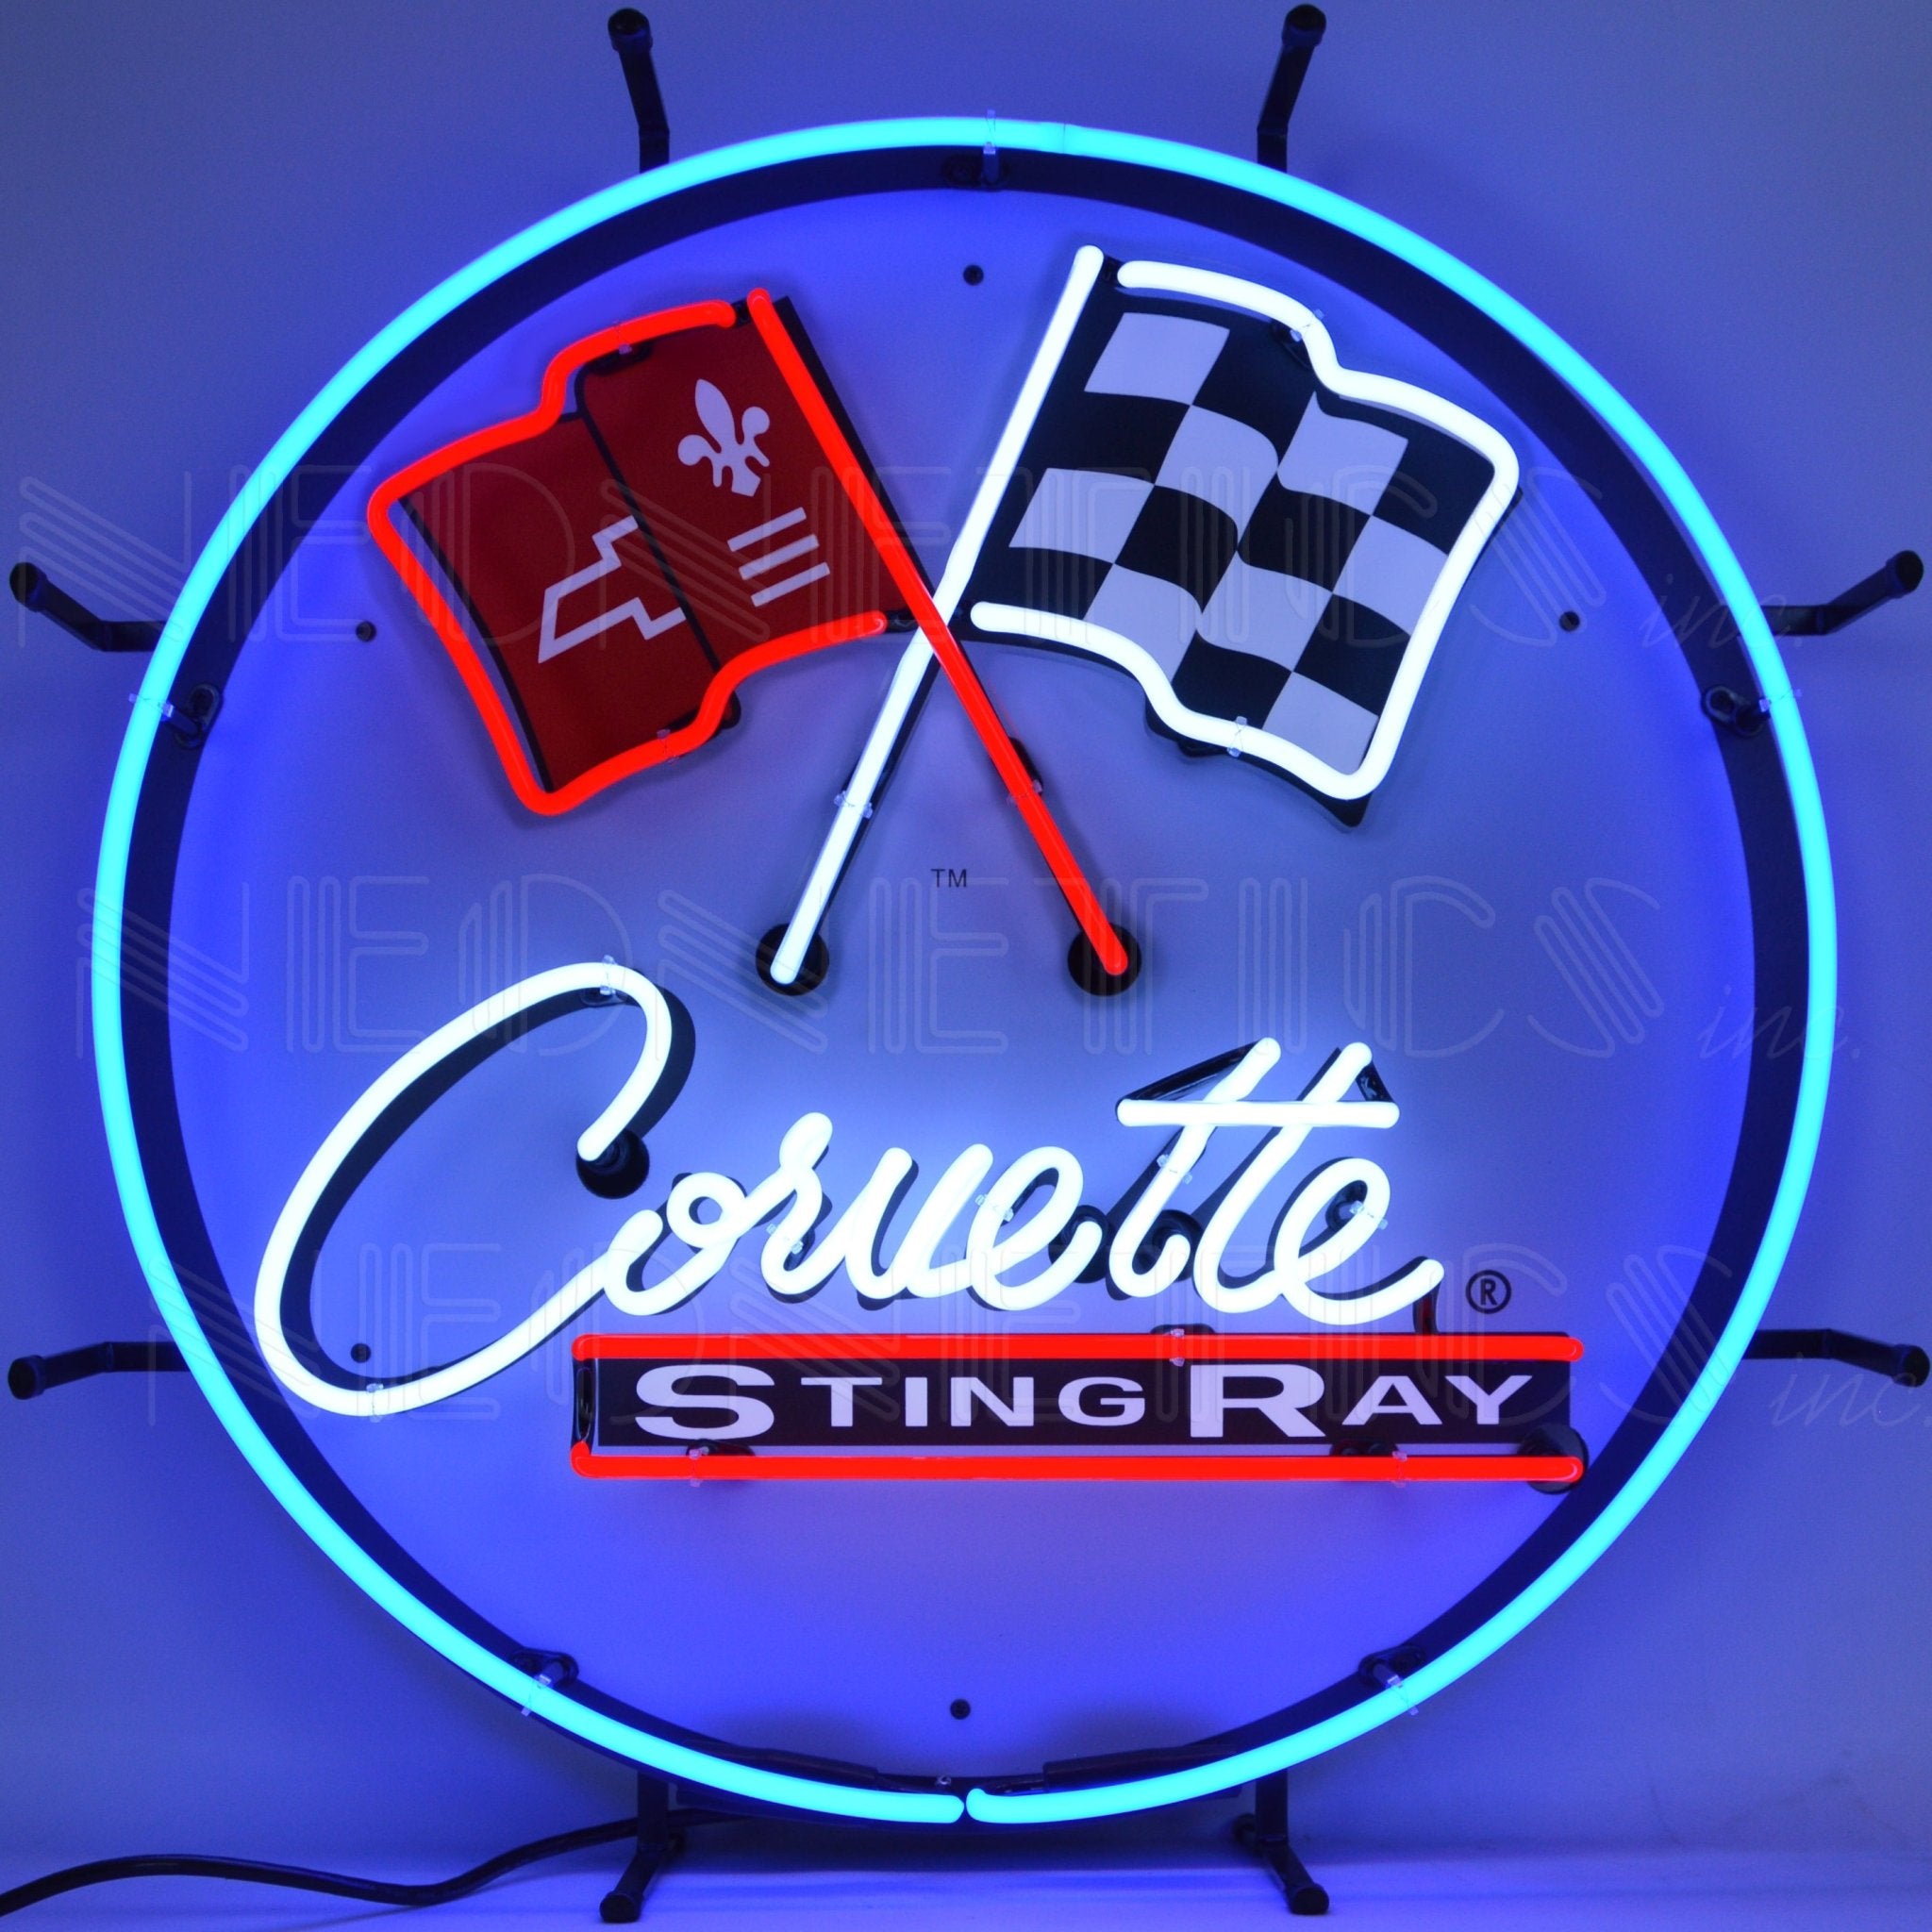 Corvette C2 Stingray Large Round Neon Sign with Backing-24" Diameter - Vette1 - C2 Neon Signs